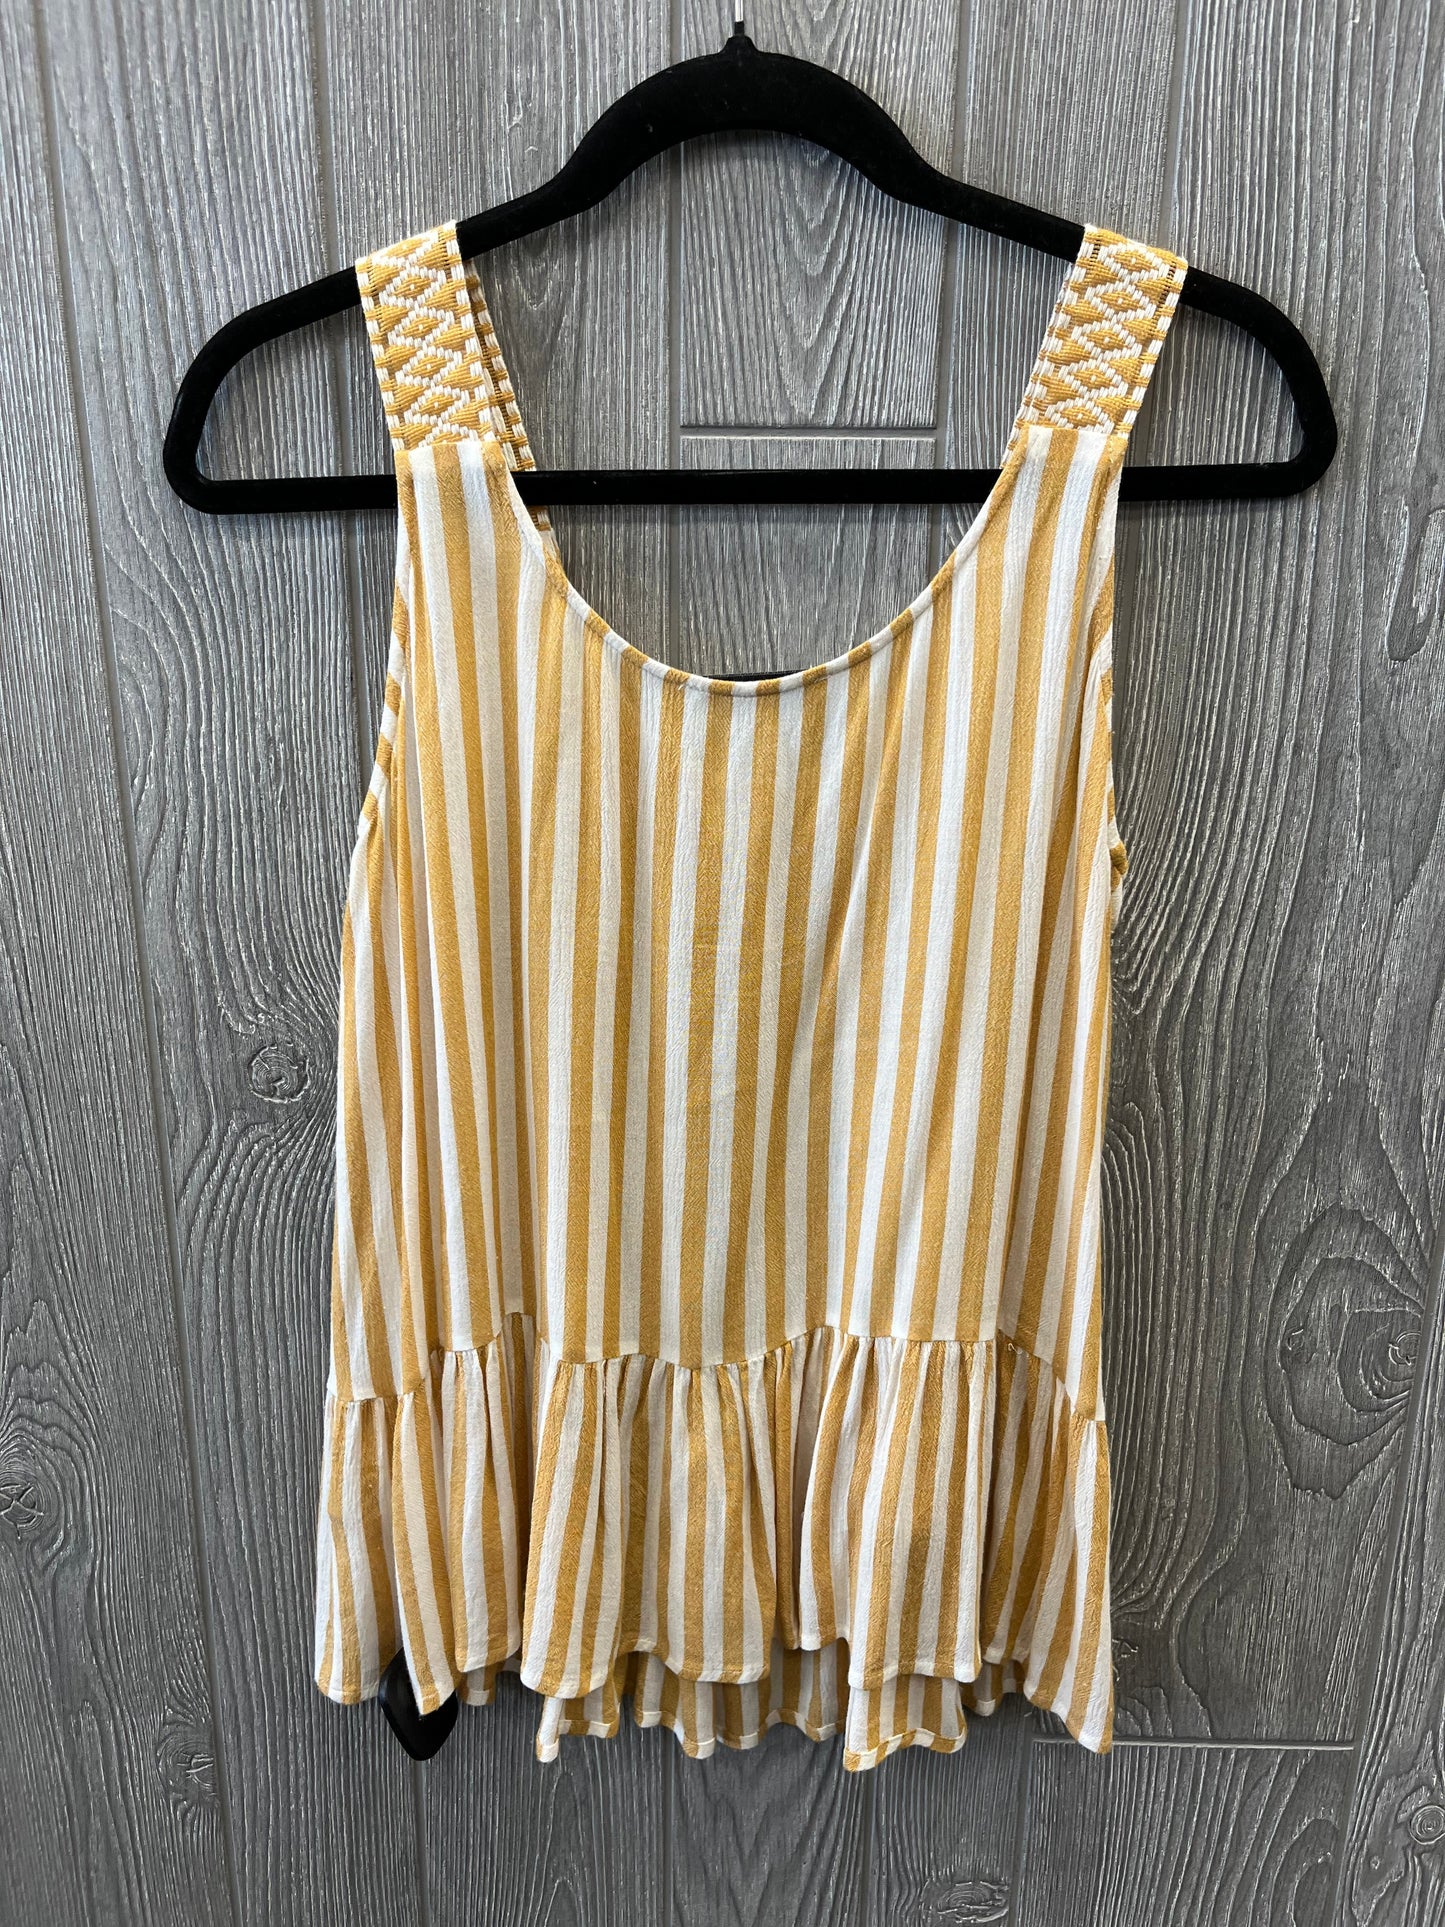 Striped Pattern Top Sleeveless Staccato, Size S